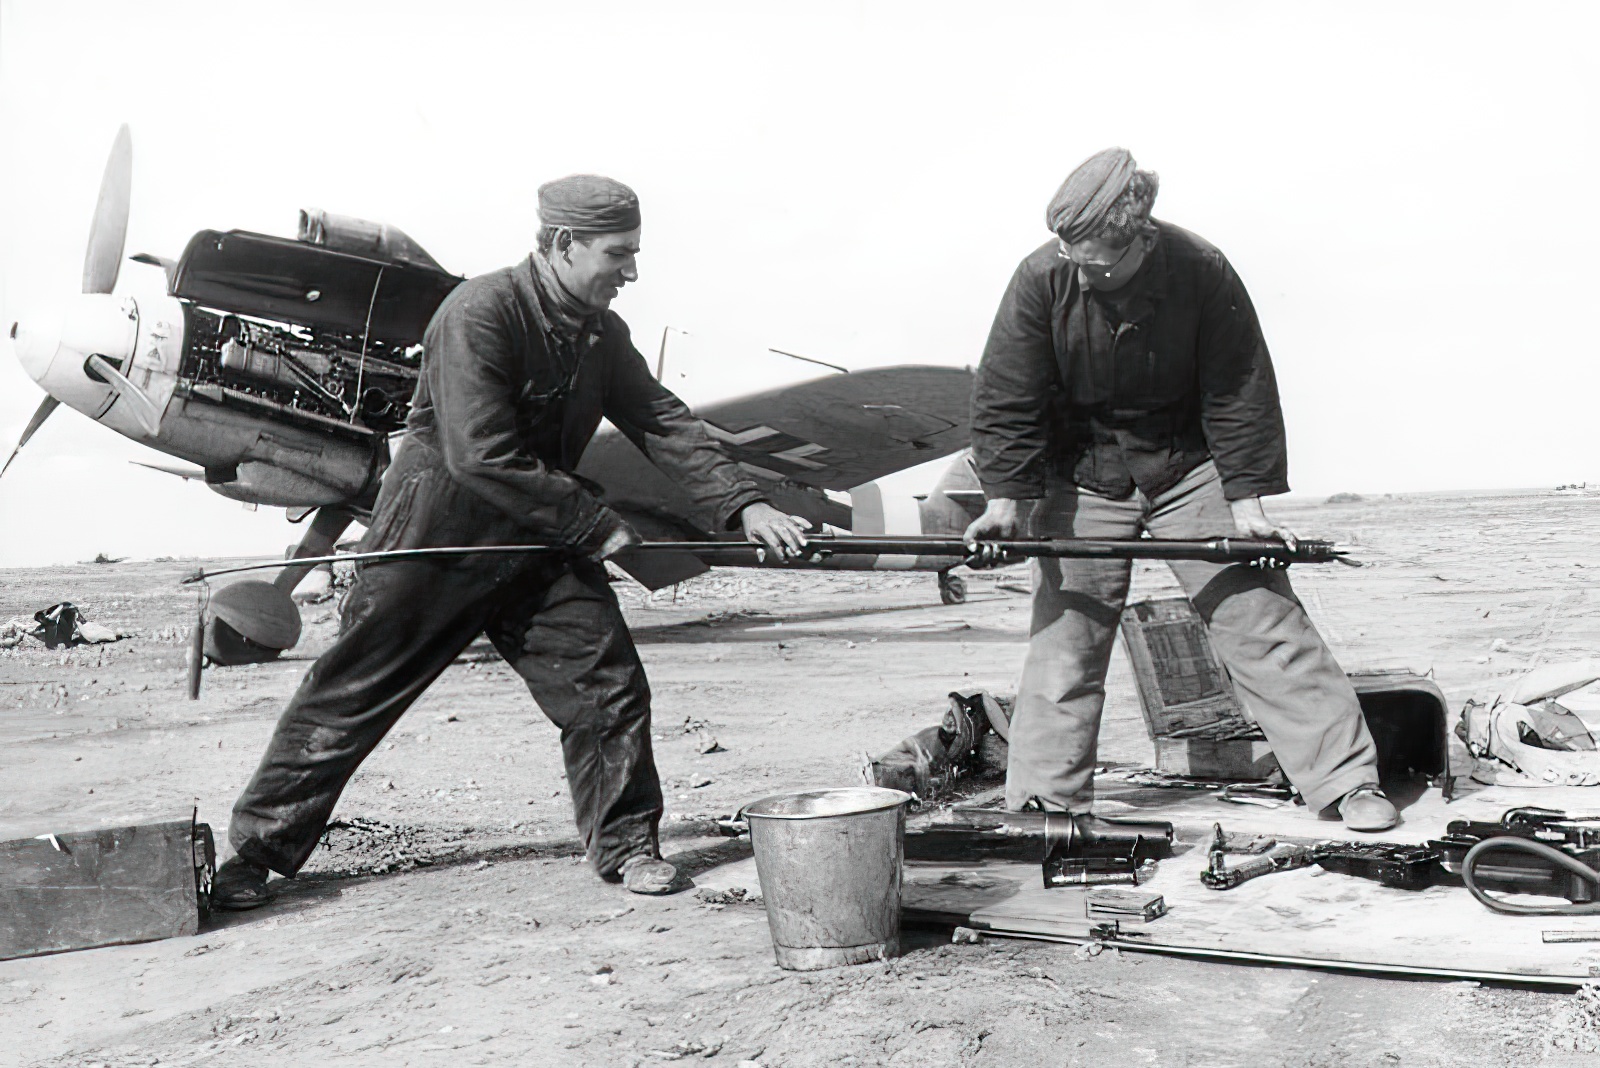 Marseille's service men, Hoffmann (left) and Berger, cleaning the bore of one of the cannons of a Bf 109. "Yellow 14" W.Nr. 8673 can be seen in the background